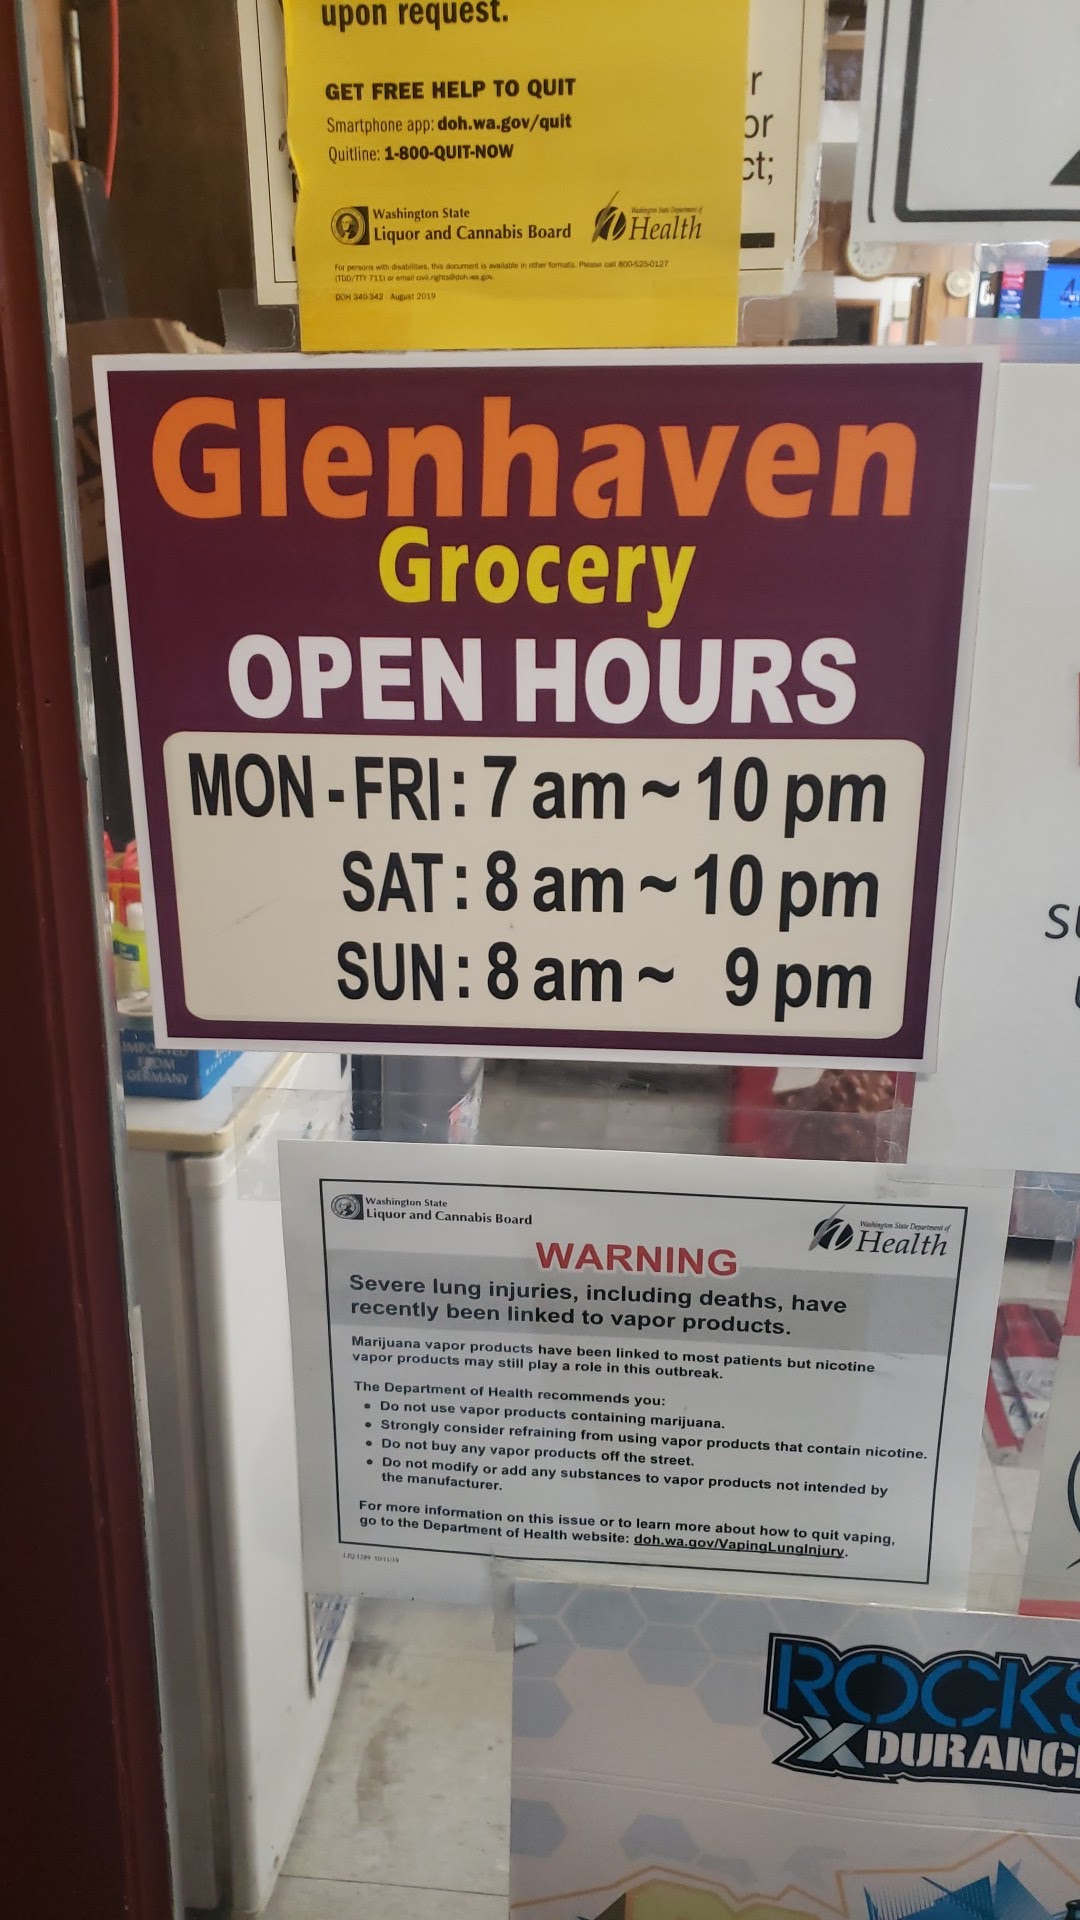 Glenhaven Country Store